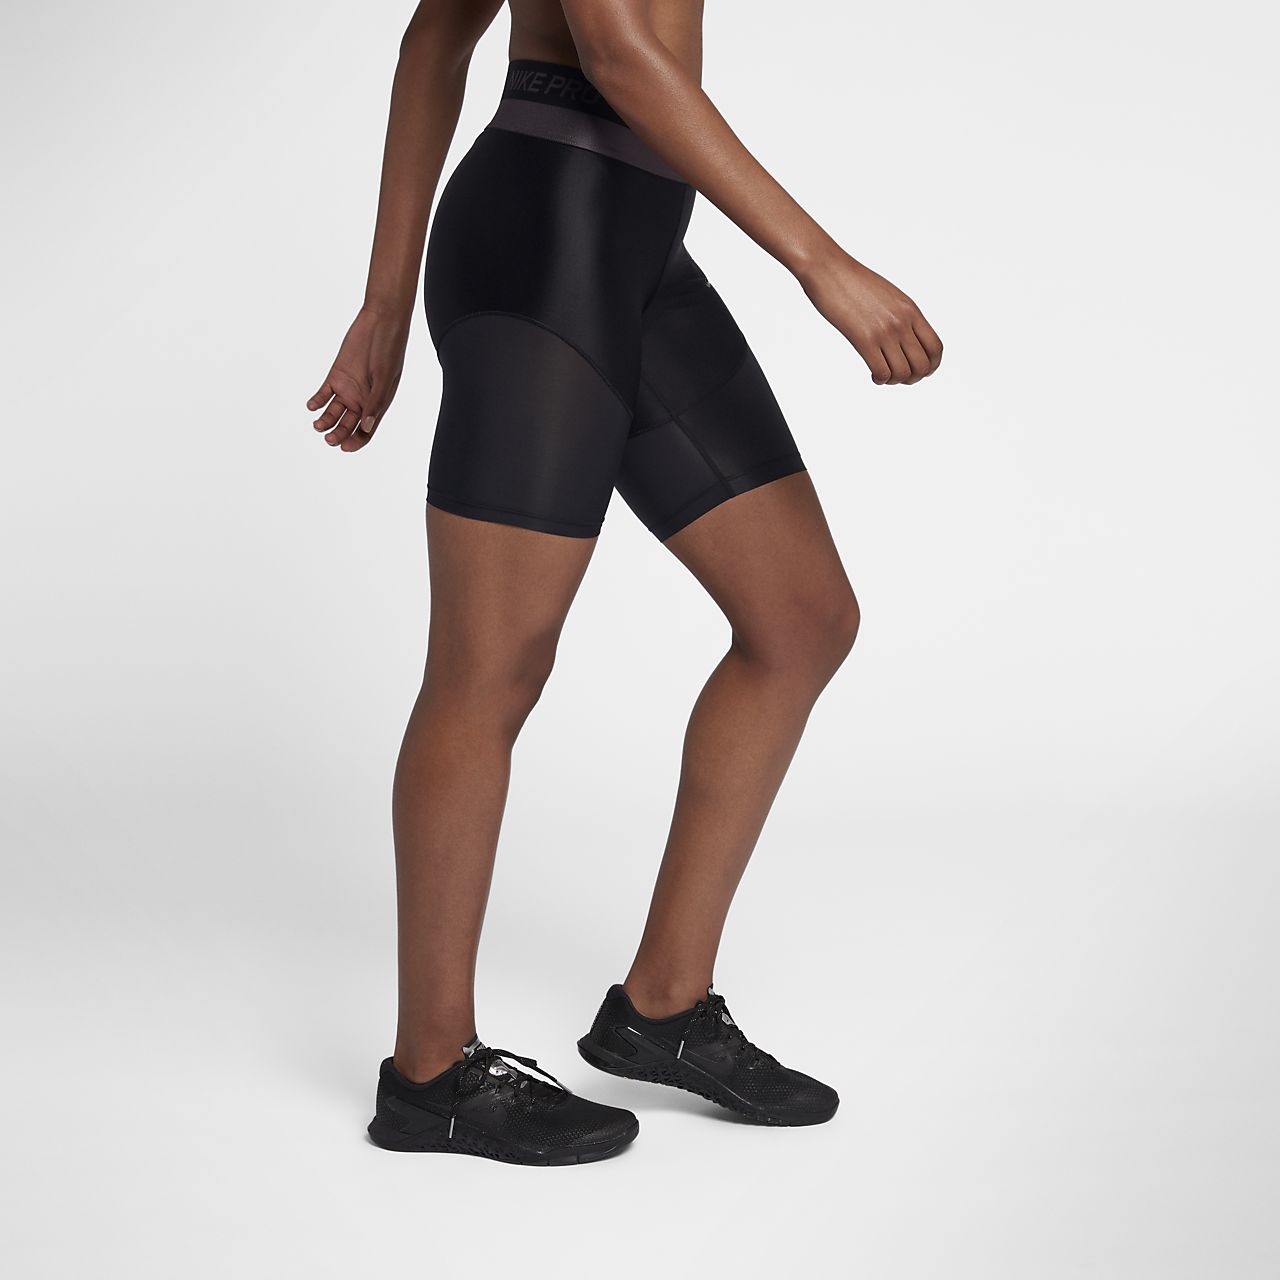 nike cycling shorts womens Sale,up to 75% Discounts